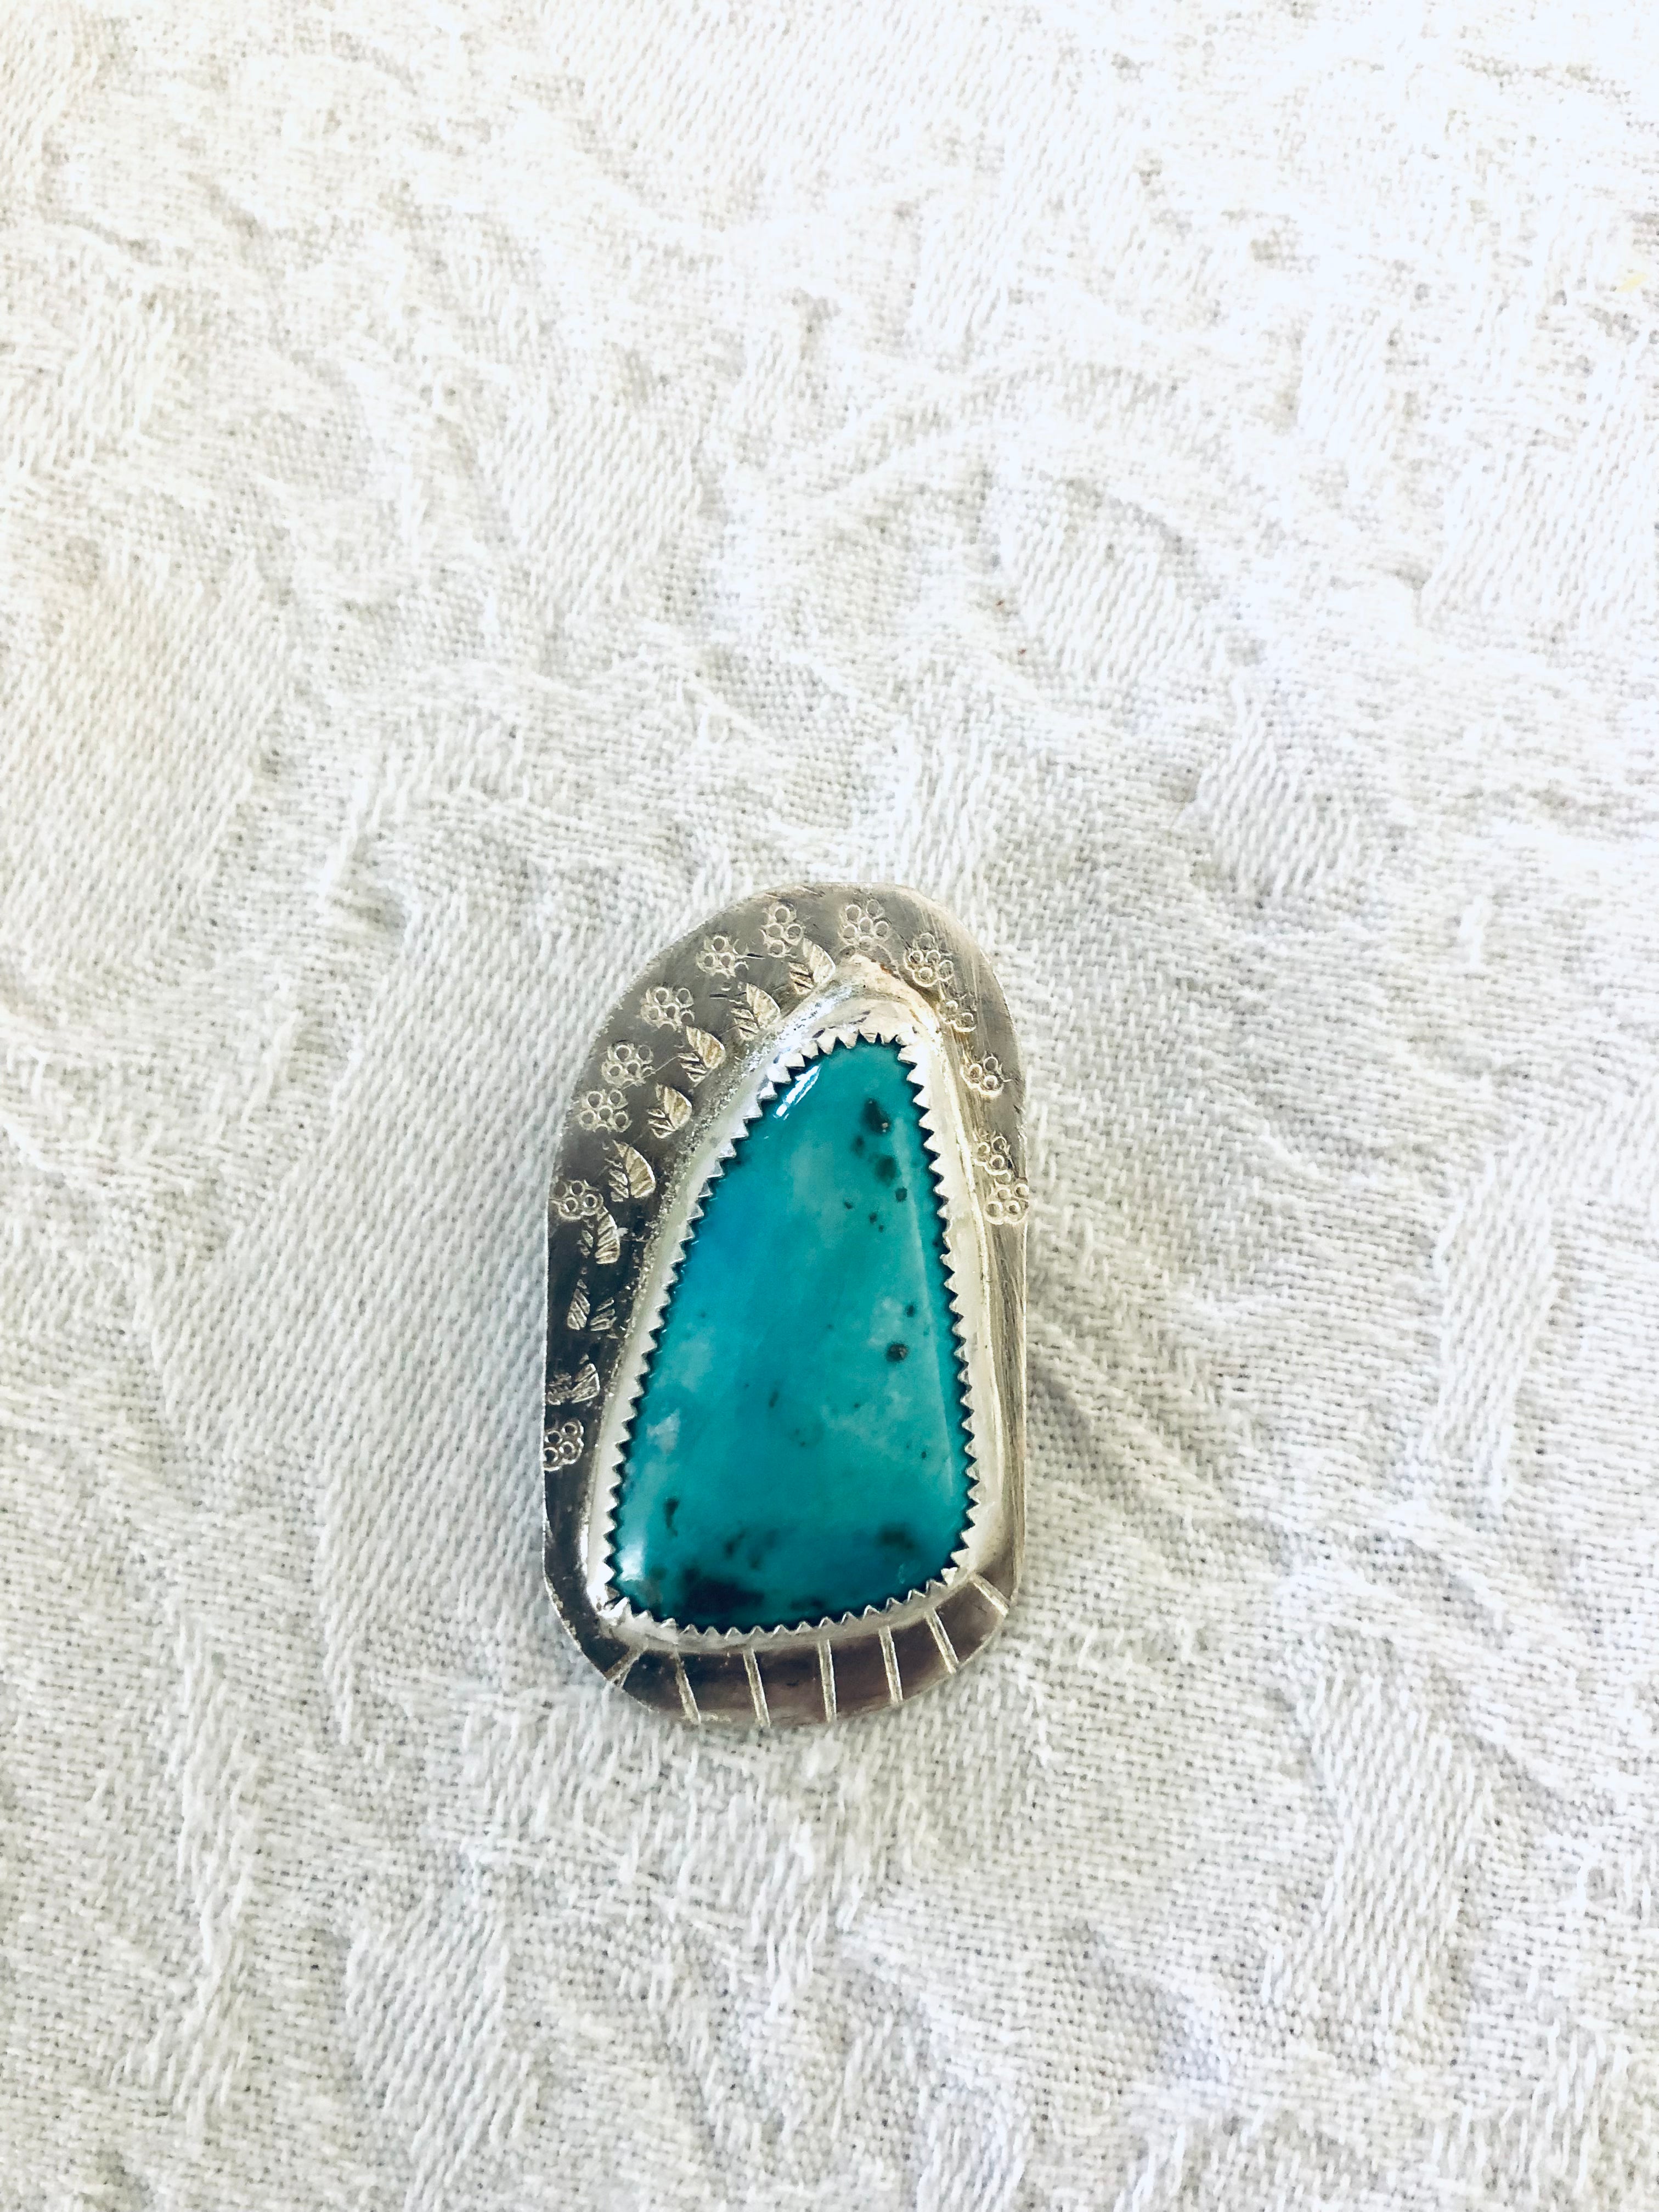 ⚘stamped Royston turquoise pendant⚘